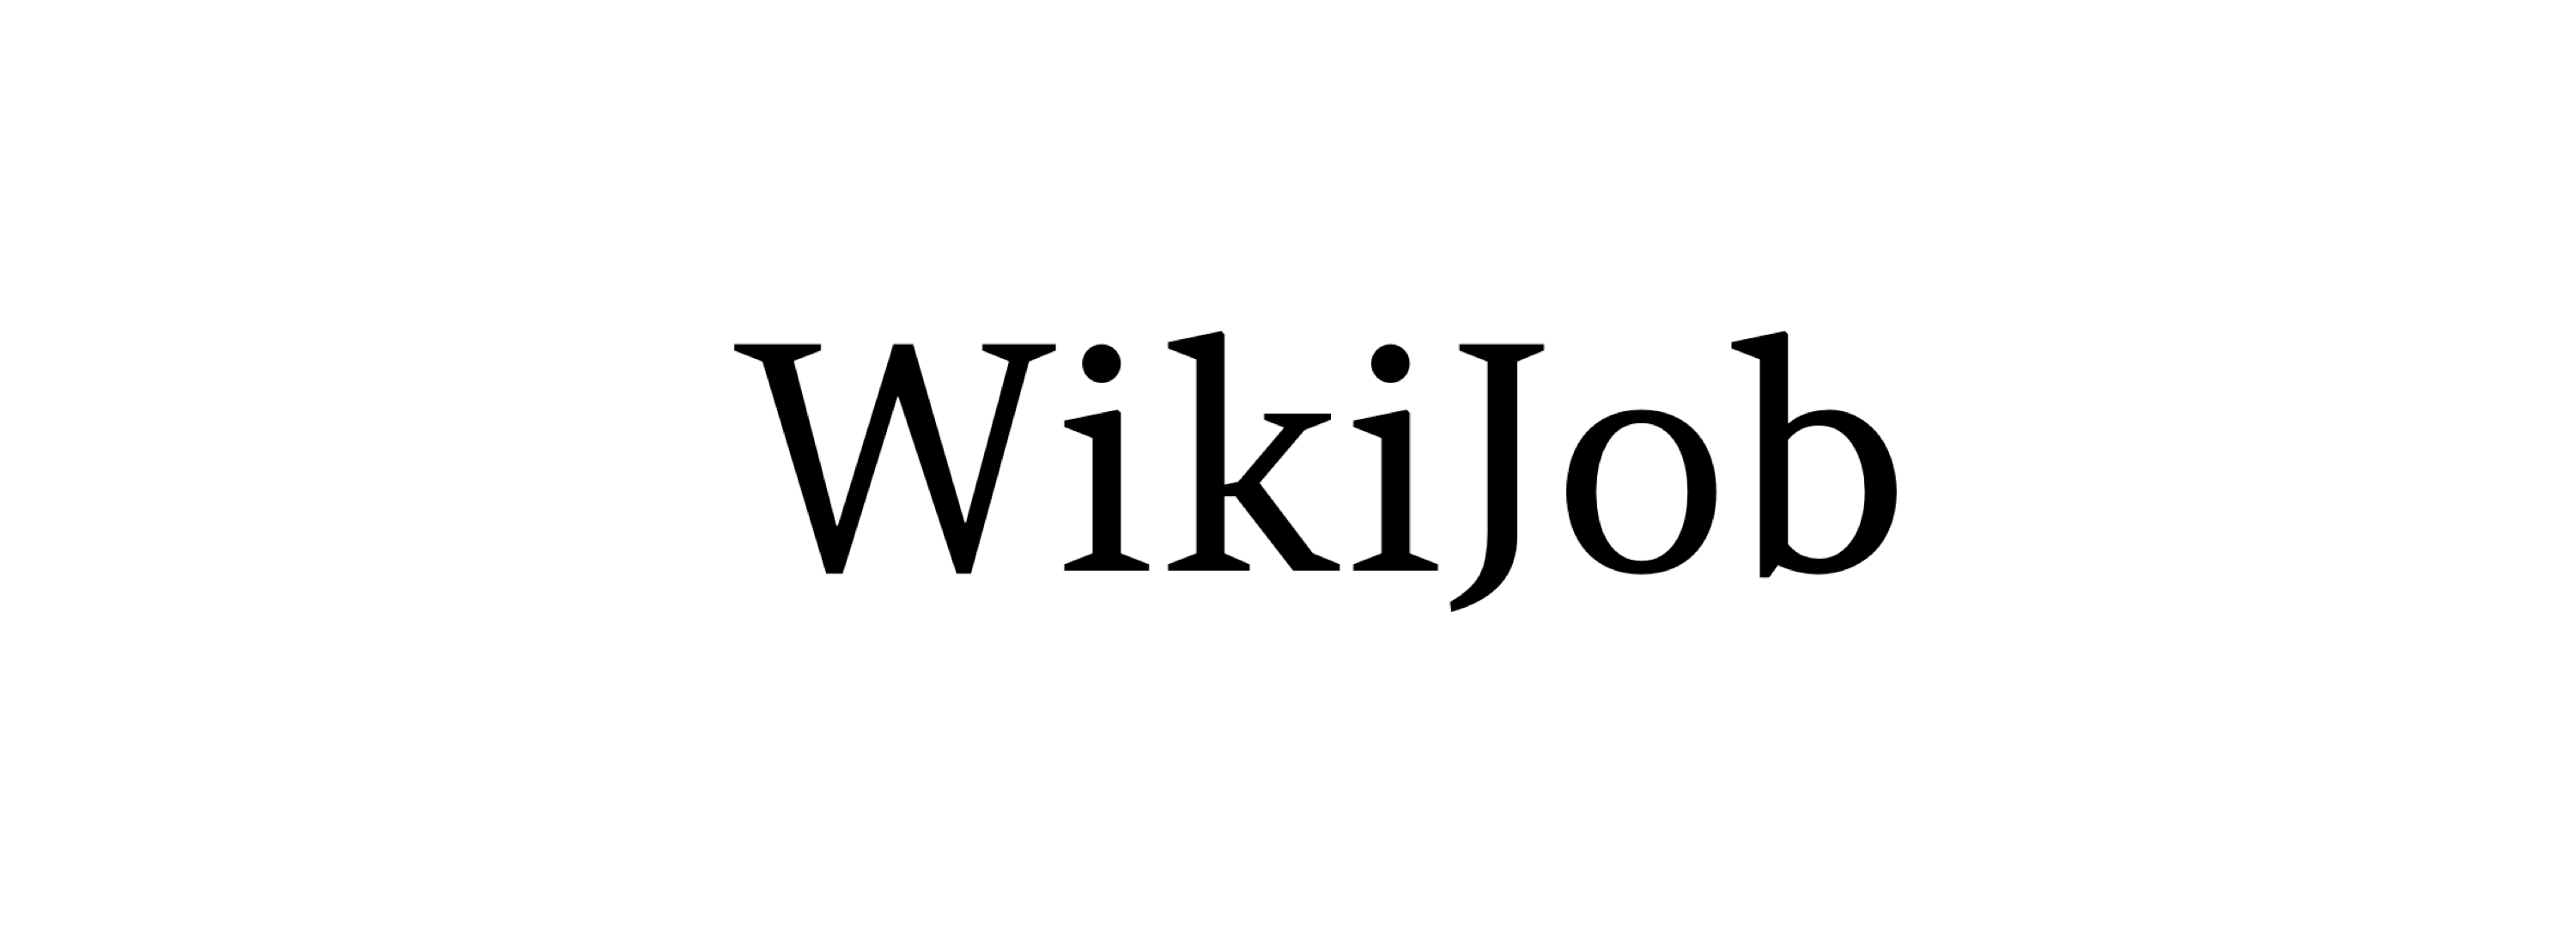 Featured on WikiJob educational resources page